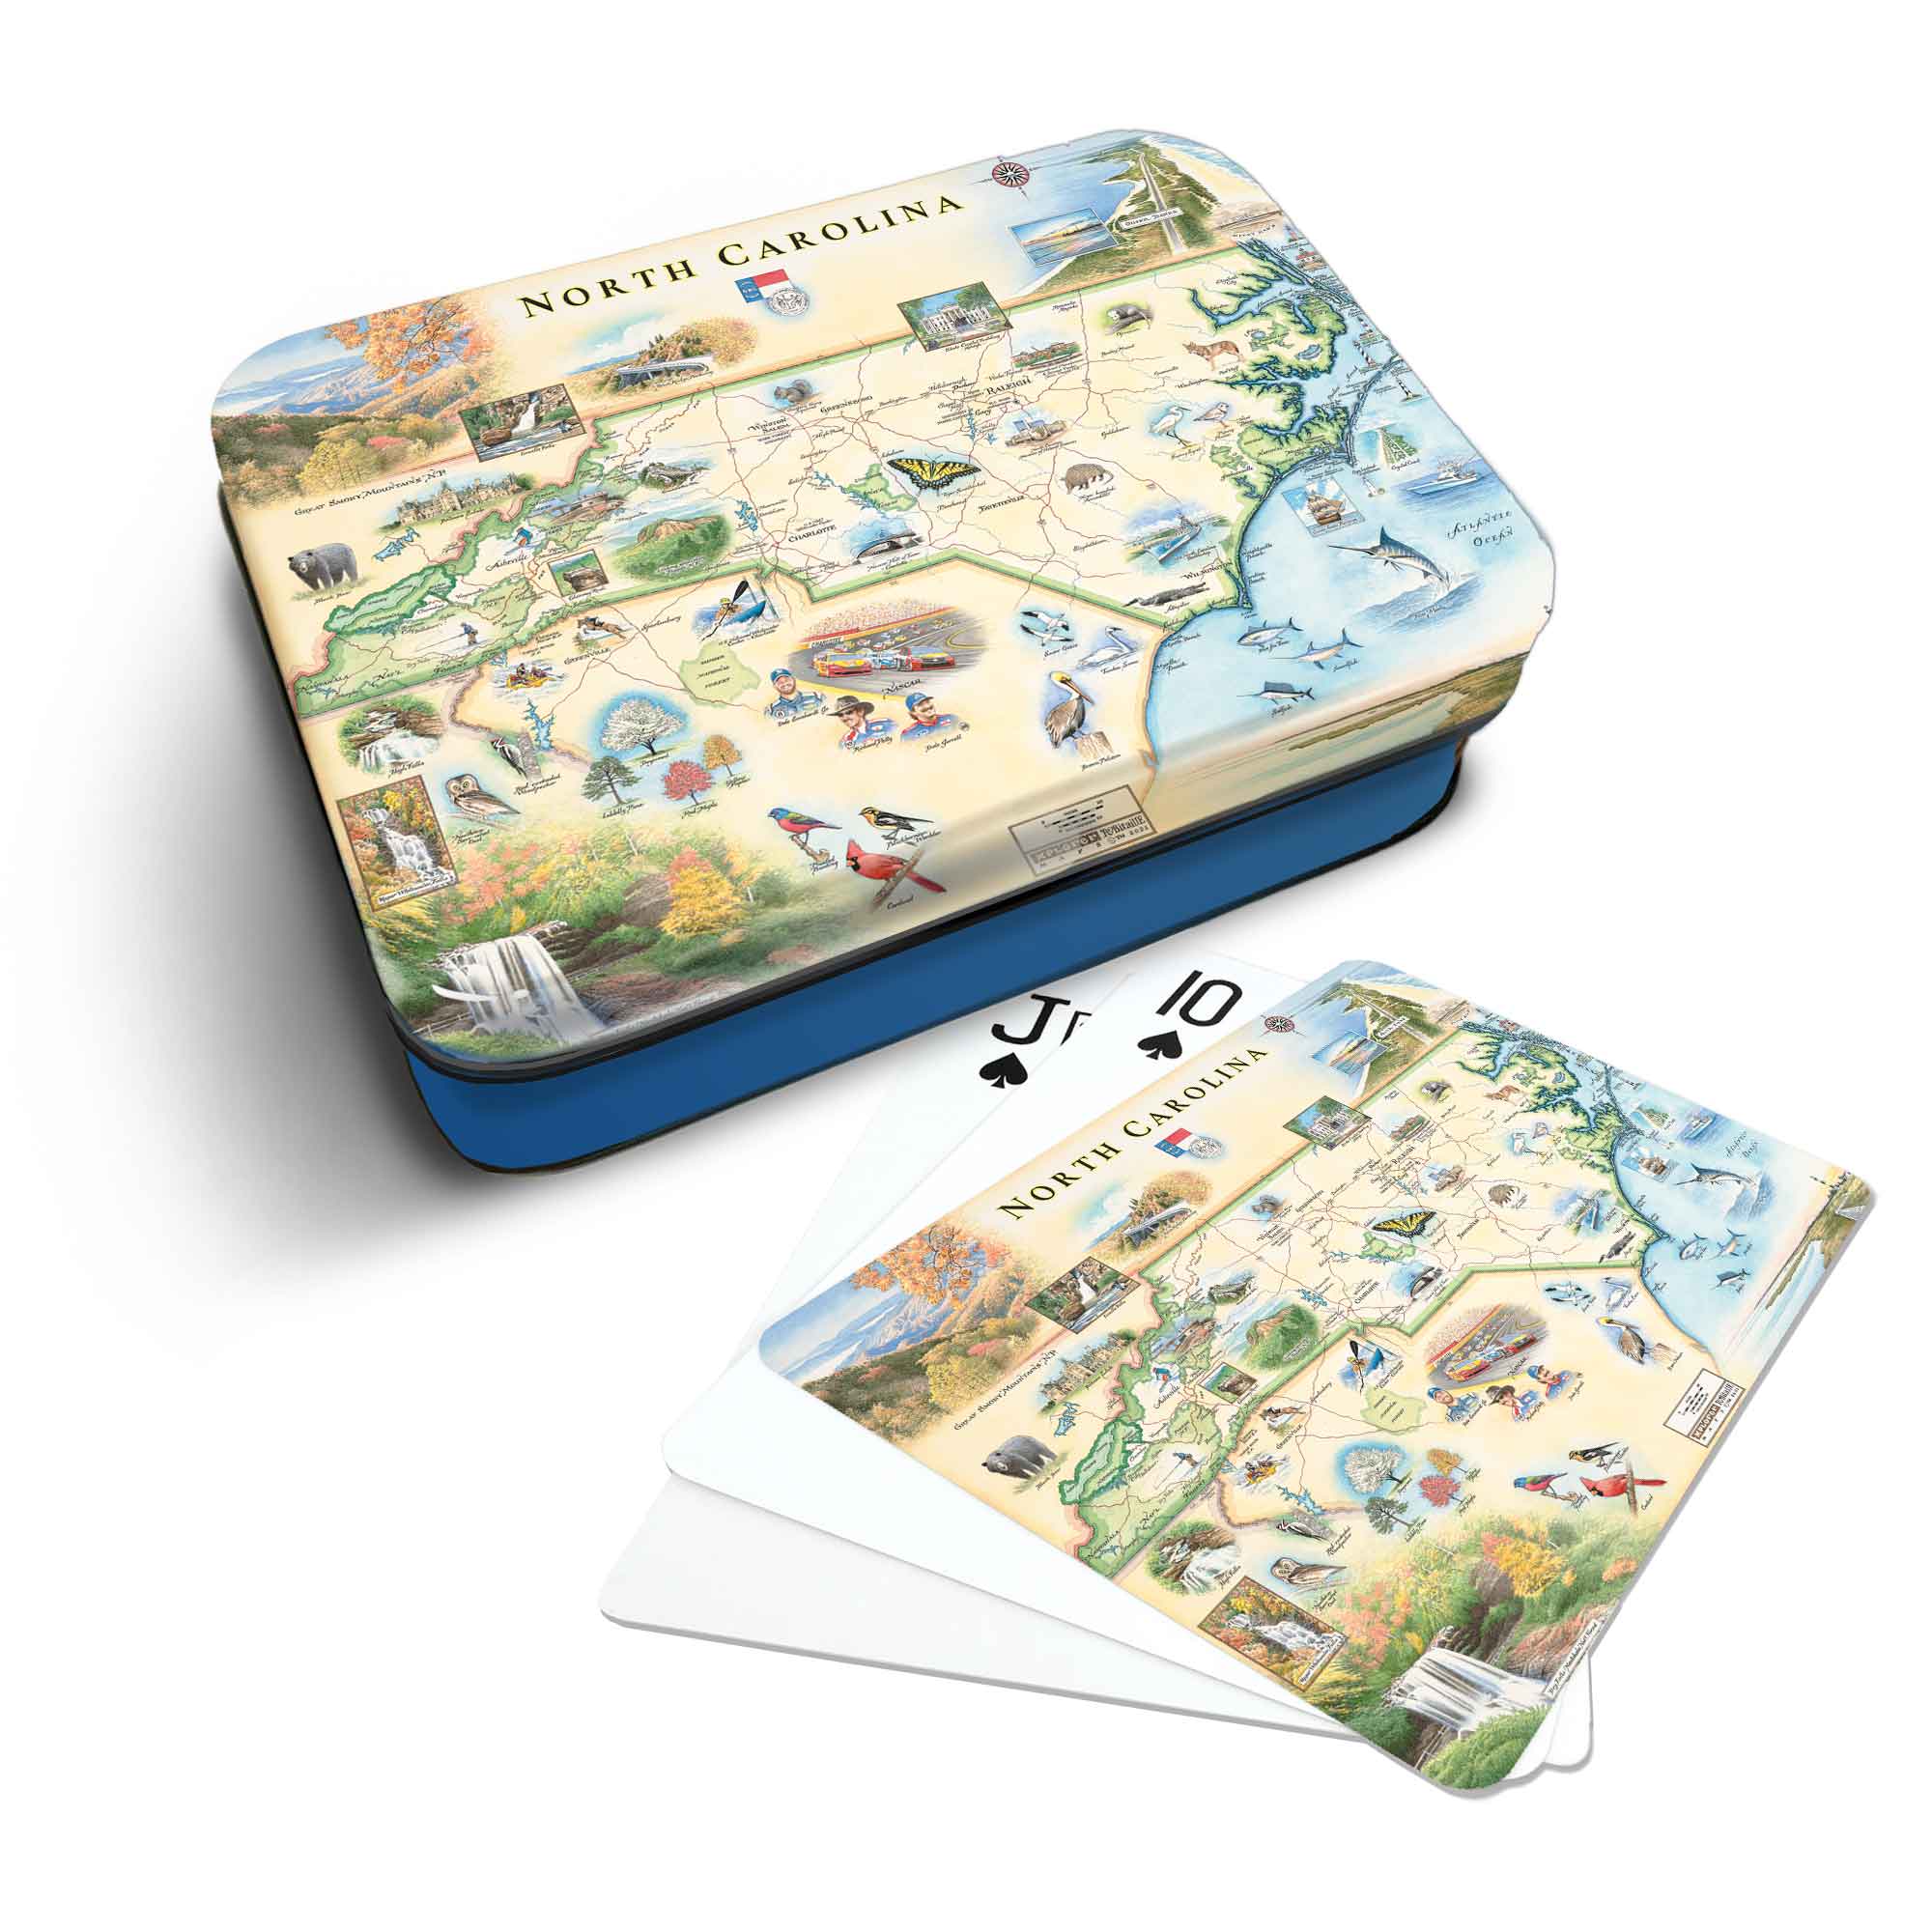 North Carolina Map Playing cards that features iconic attractions, flora and fauna of that area - Blue Metal Tin